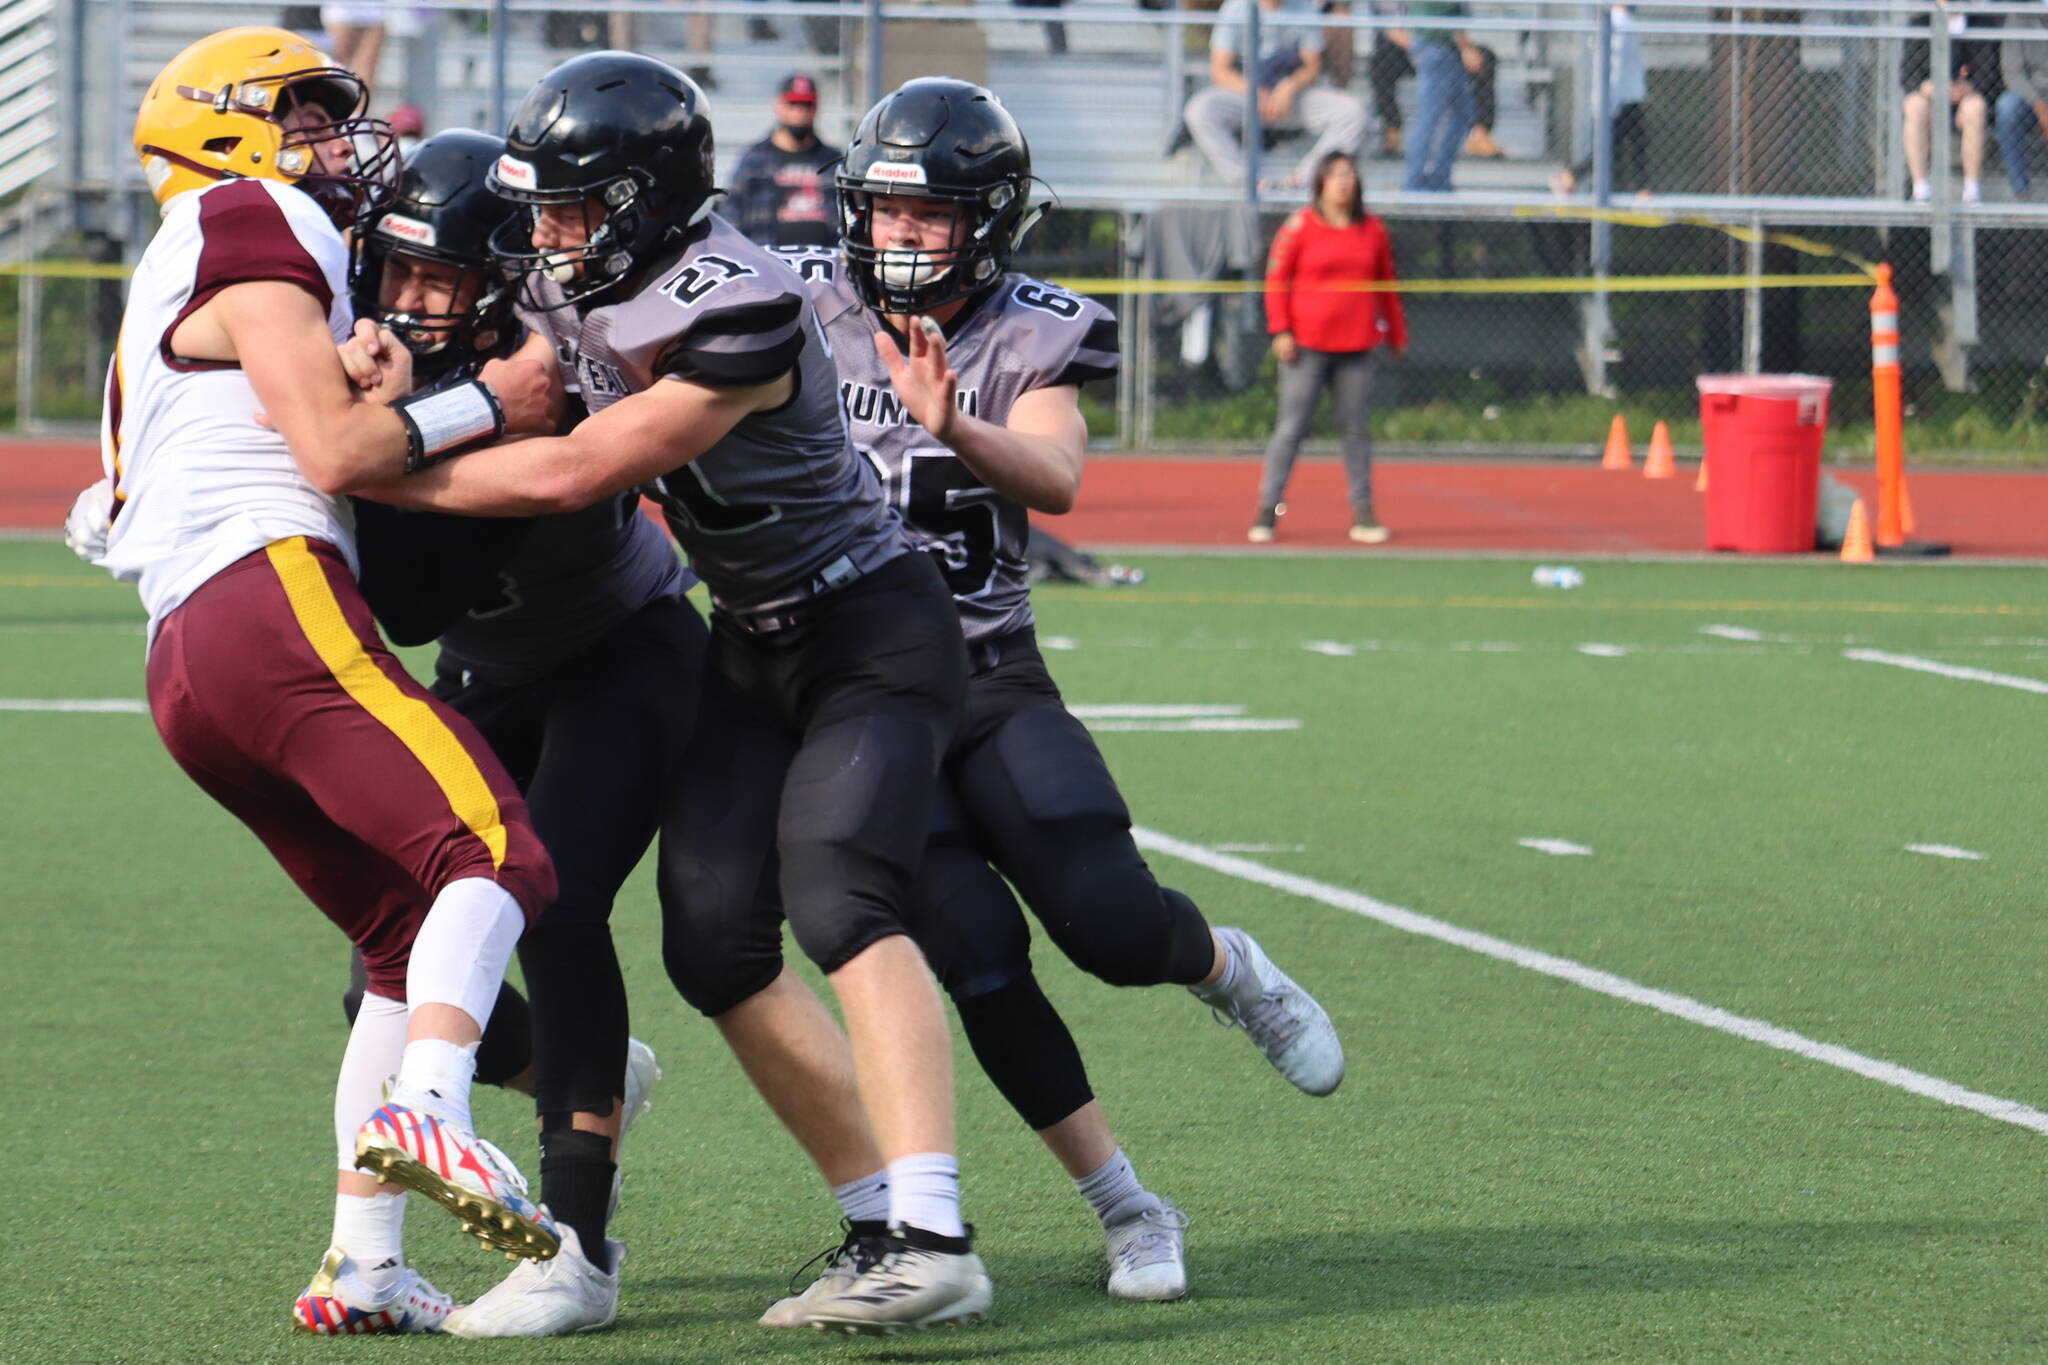 Lucas White (21) and two other Huskies take down a player from Dimond High School on Saturday, Aug. 21. Juneau coach Rich Sjoroos said solid tackling by White and others played a major role in the Huskie’s 27-14 win against Bartlett High School. (Ben Hohenstatt / Juneau Empire File)